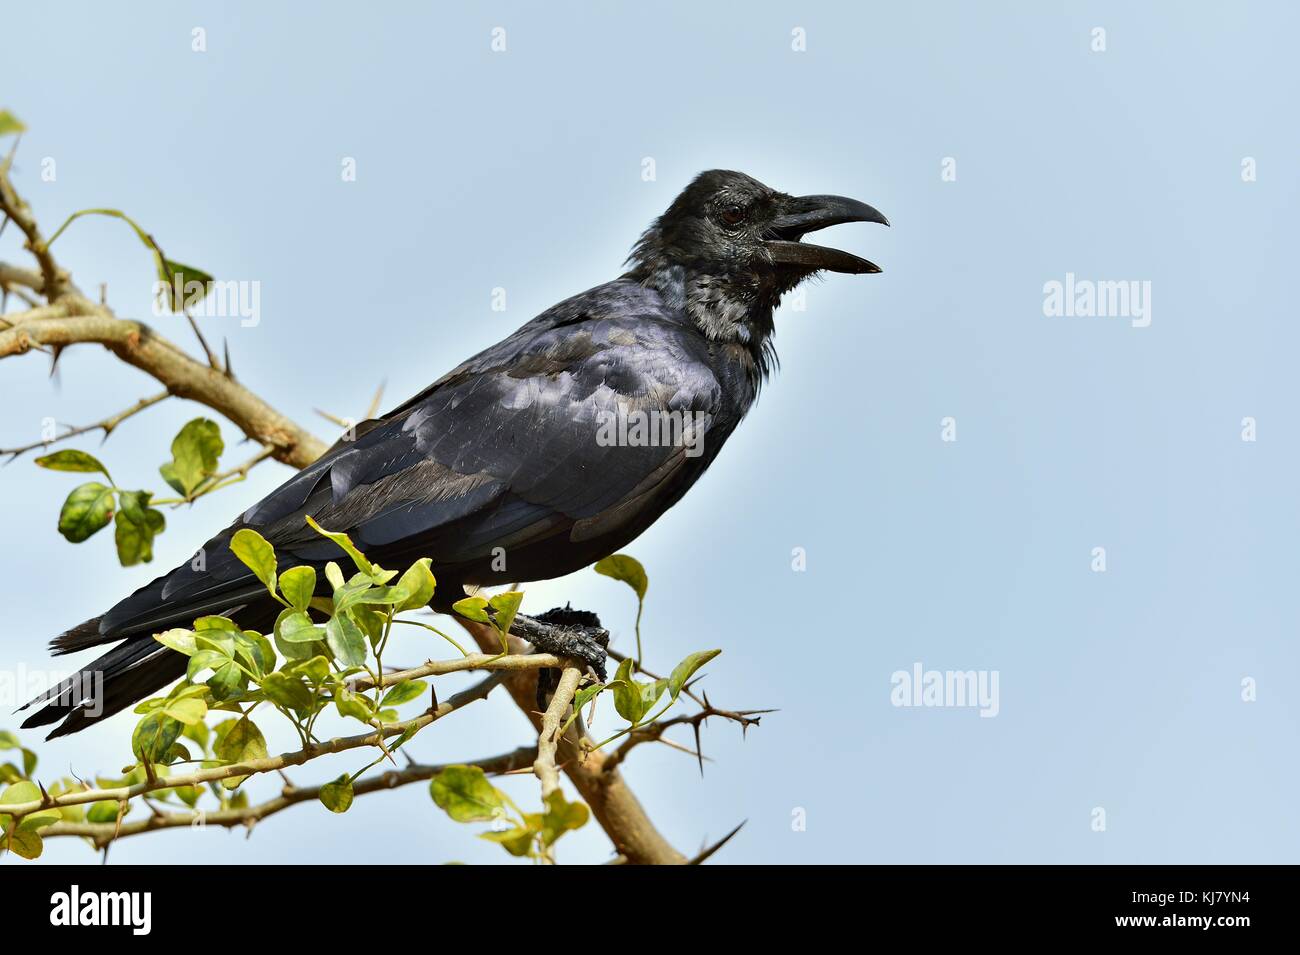 Cawing crow.The Indian jungle crow (Corvus culminatus) on the branch. Blue sky background Stock Photo